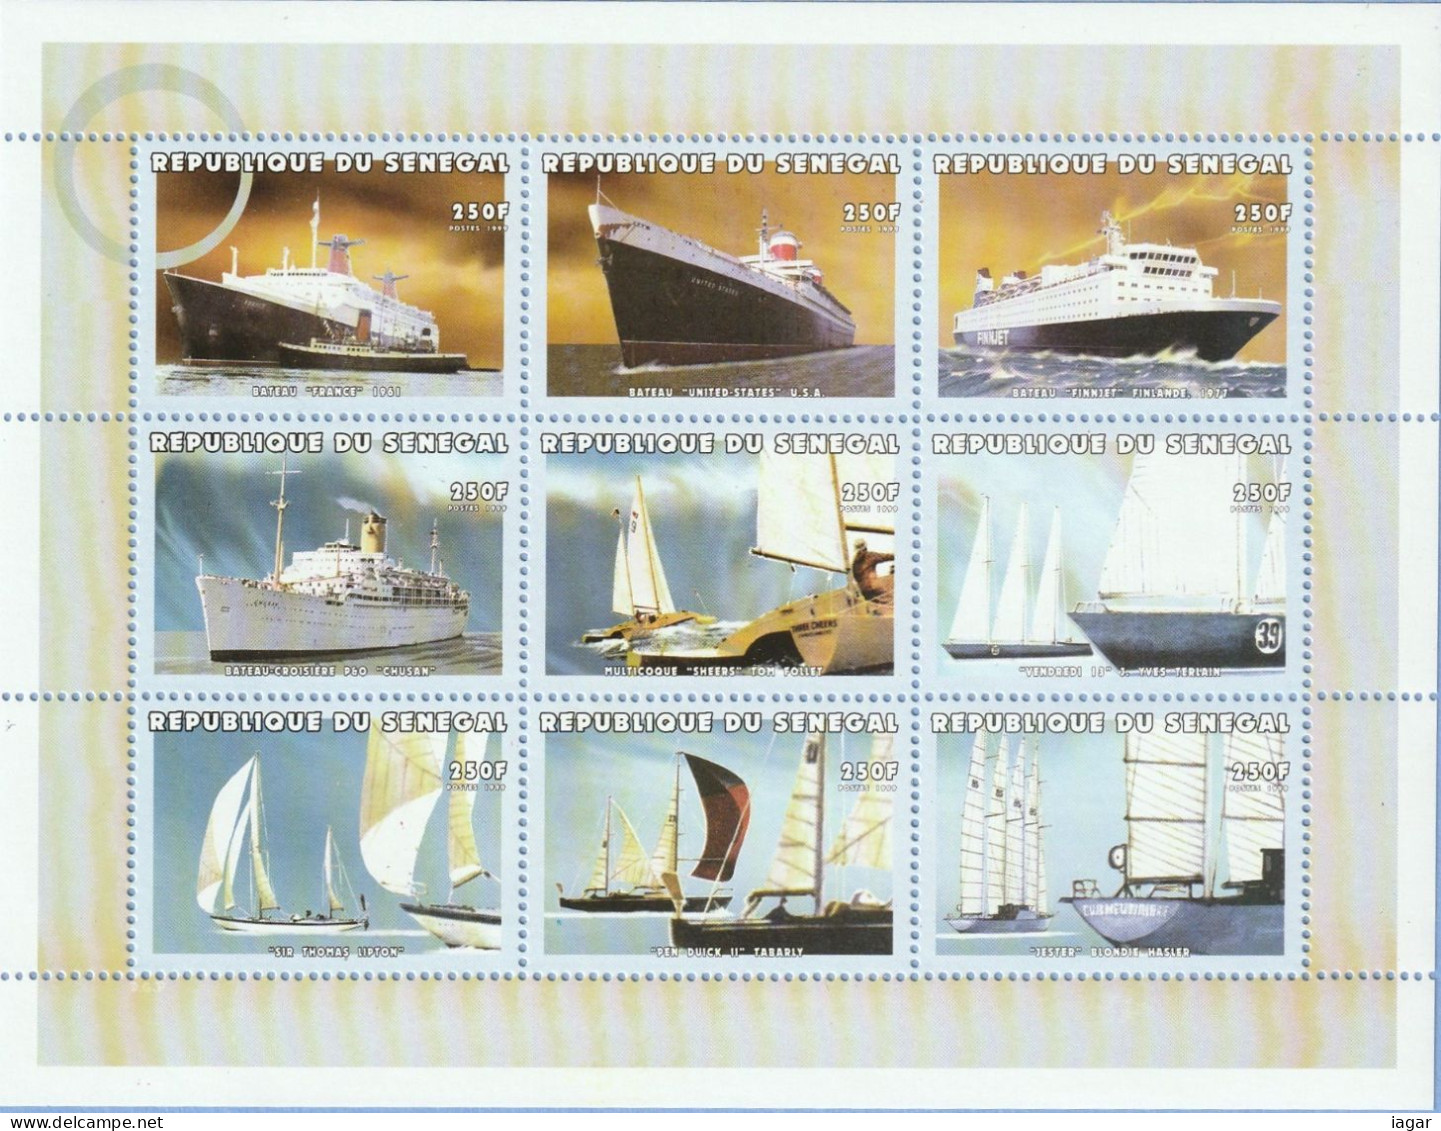 THEMATIC TRANSPORT: HISTORIC SHIPS AND FAMOUS SAILING SHIPS. LE"FRANCE", "UNITED STATES", "PEN DUICK II"  Etc  - SENEGAL - Other (Sea)